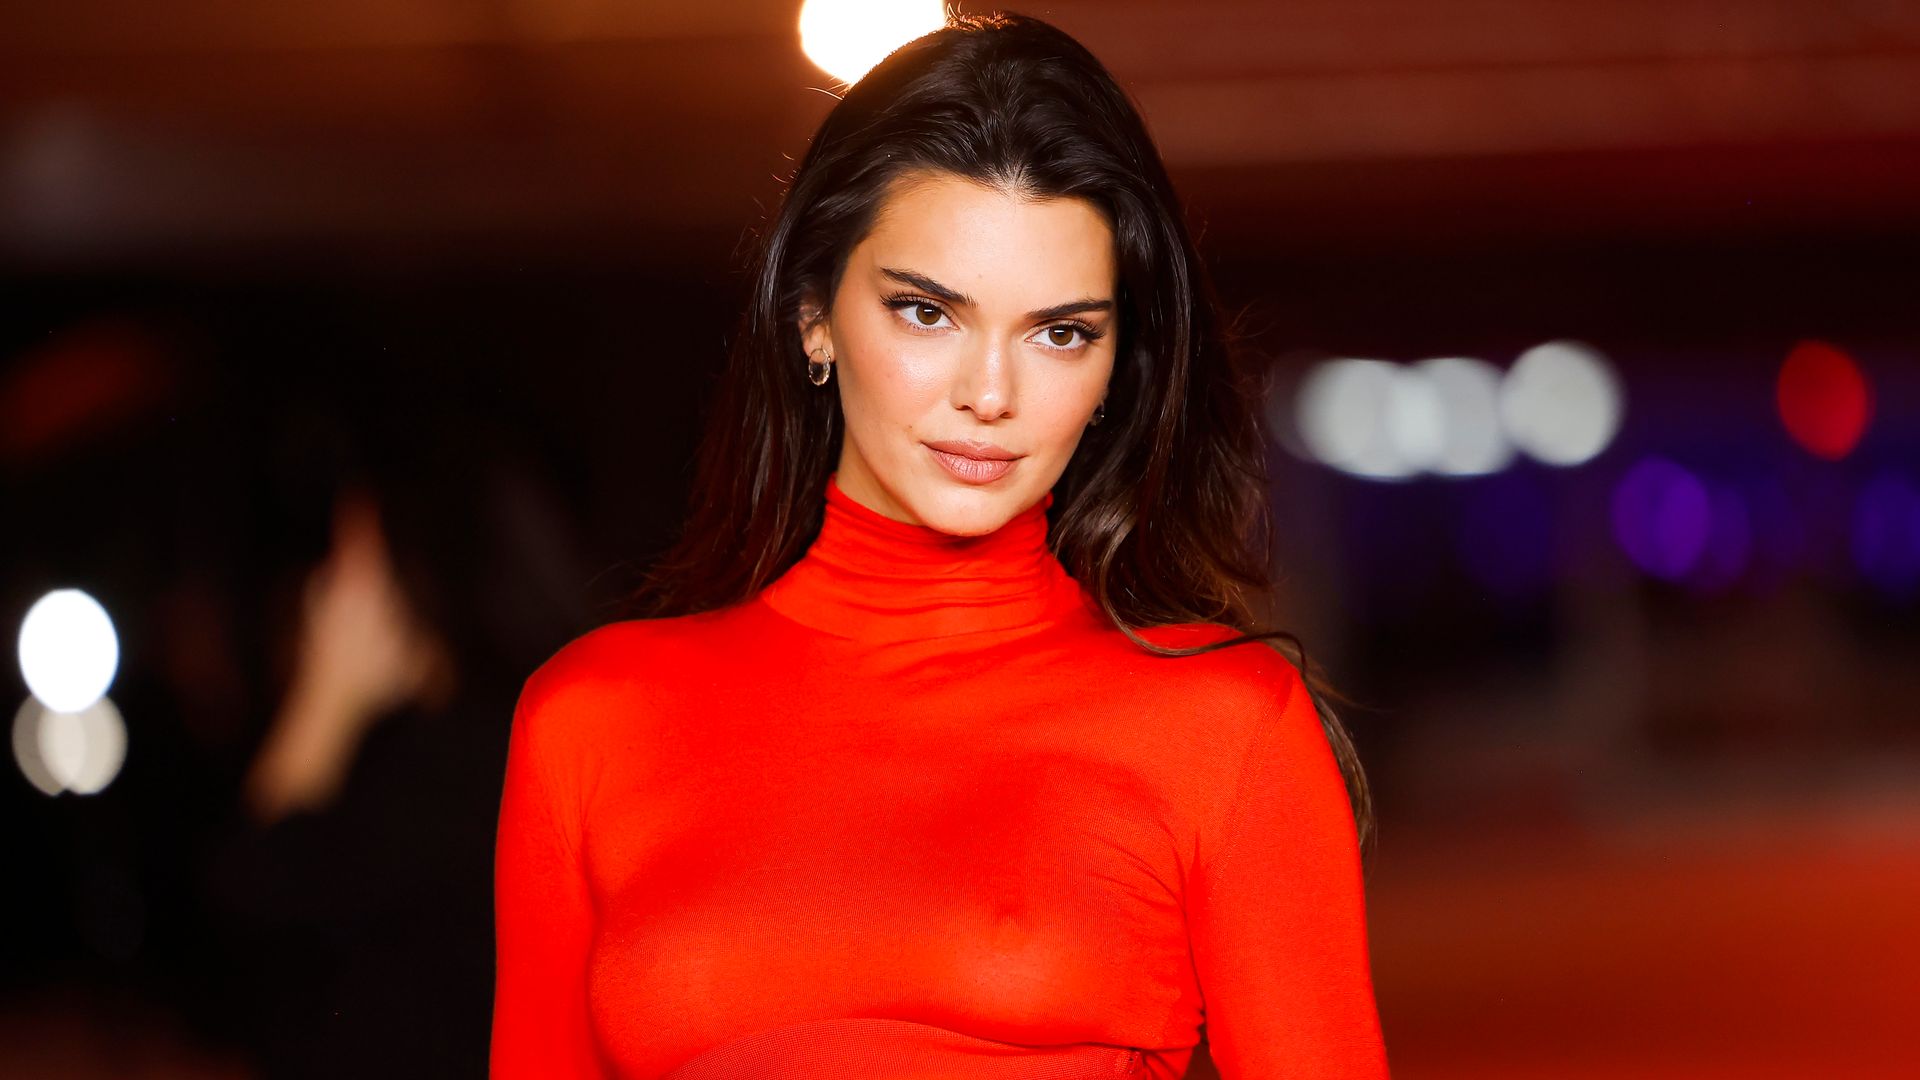 Kendall Jenner opens up about her challenges in modeling: 'I've had really dark nights'